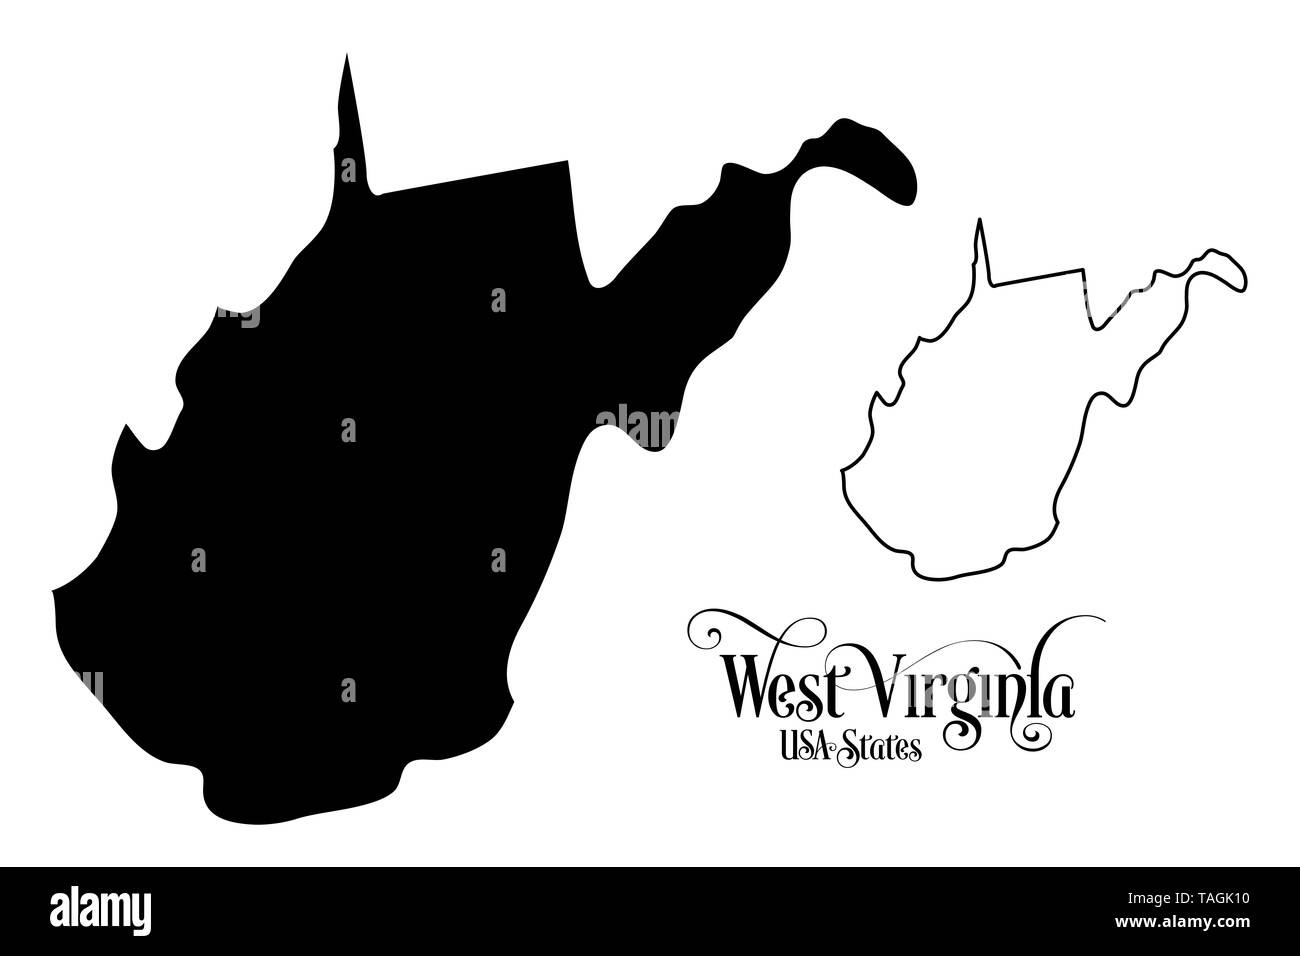 Map of The United States of America (USA) State of West Virginia - Illustration on White Background. Stock Photo